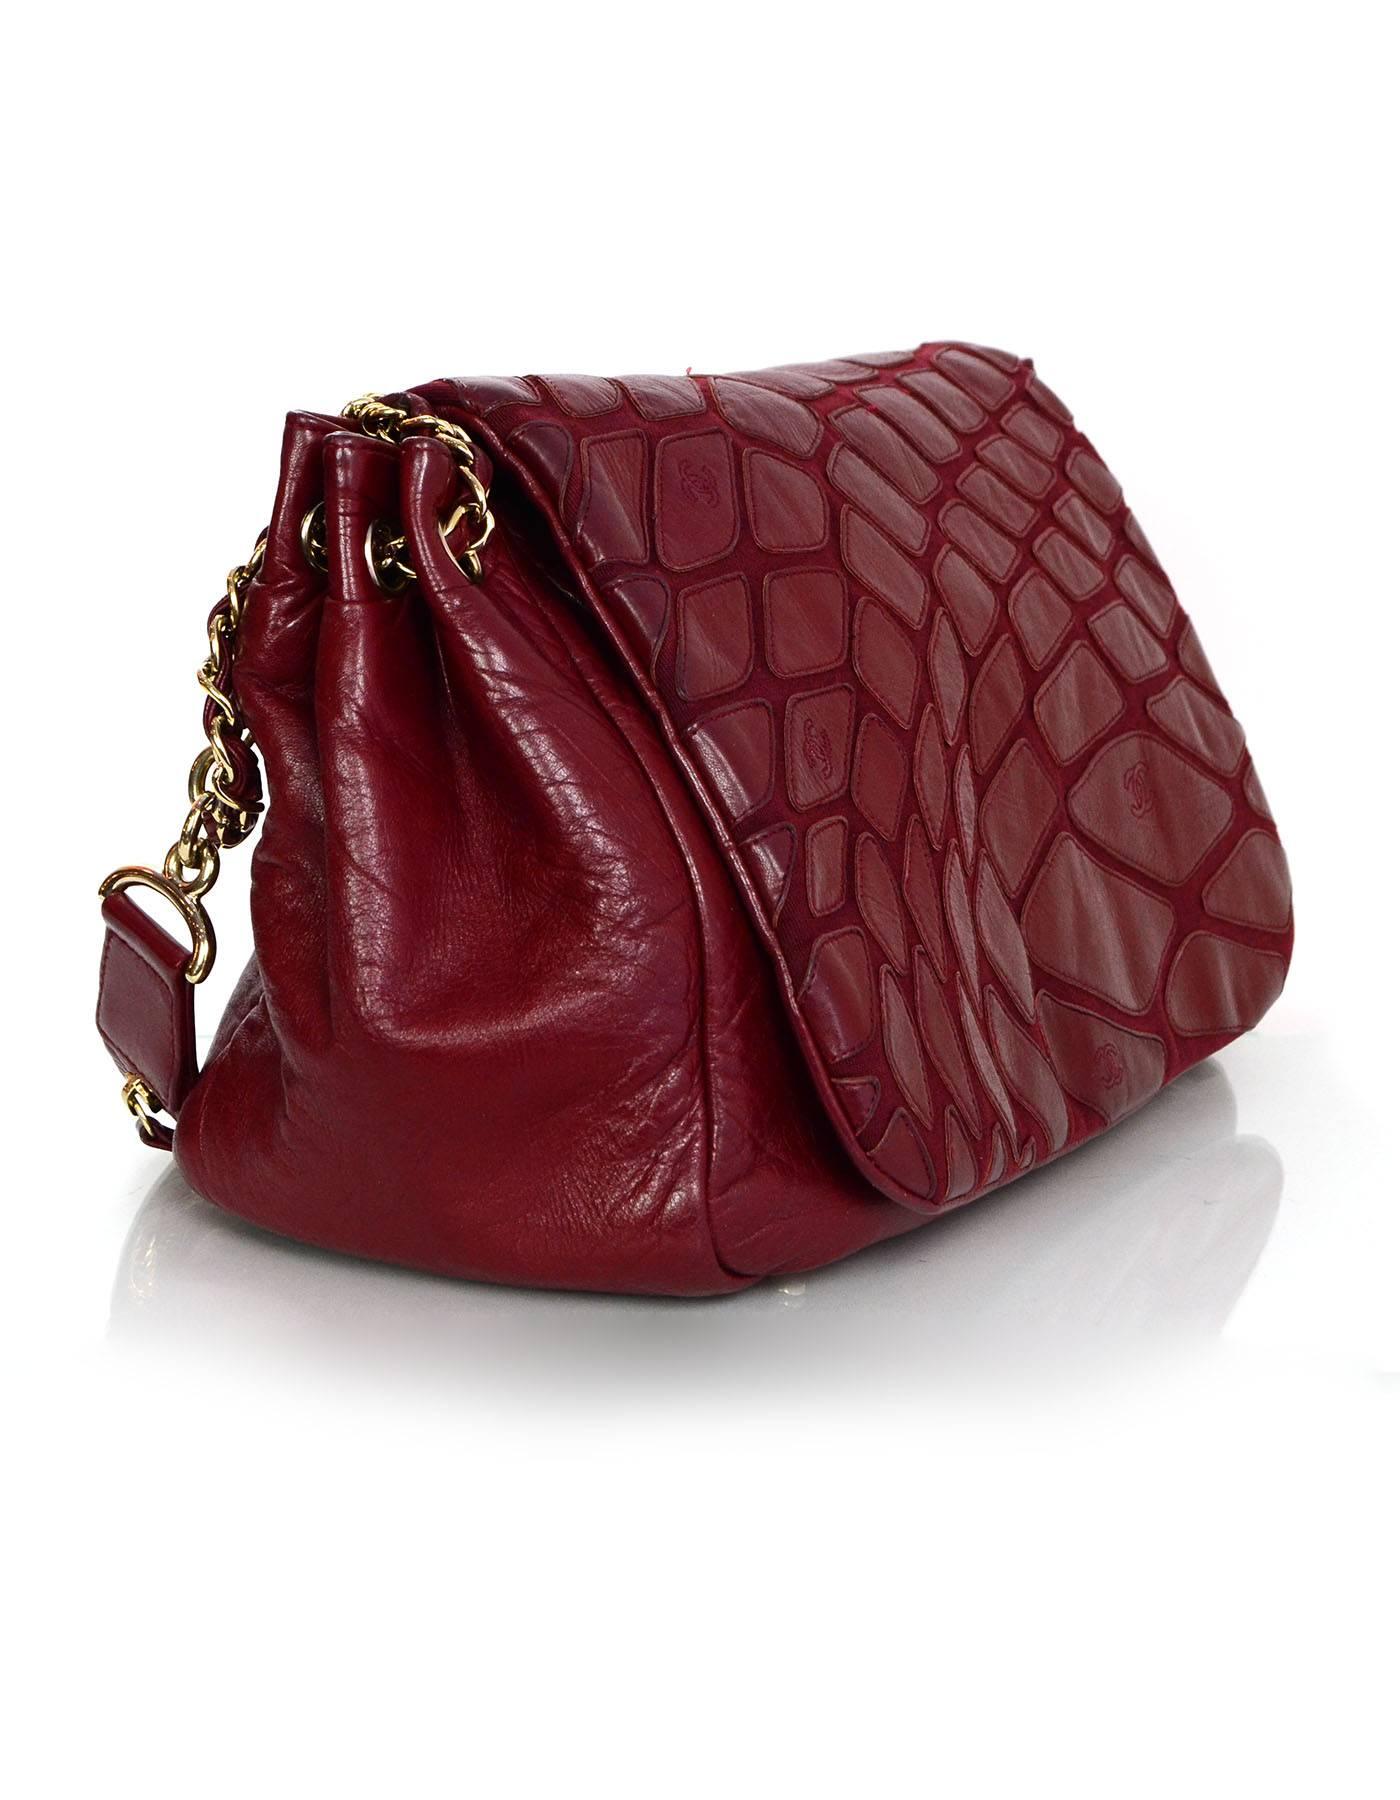 Chanel Red Scales Leather Accordion Flap Bag  
Features CC charm detail at shoulder strap and zipper detailing along shoulder strap

Made In: Italy
Year of Production: 2009
Color: Red
Hardware: Goldtone
Materials: Distressed leather
Lining: Beige